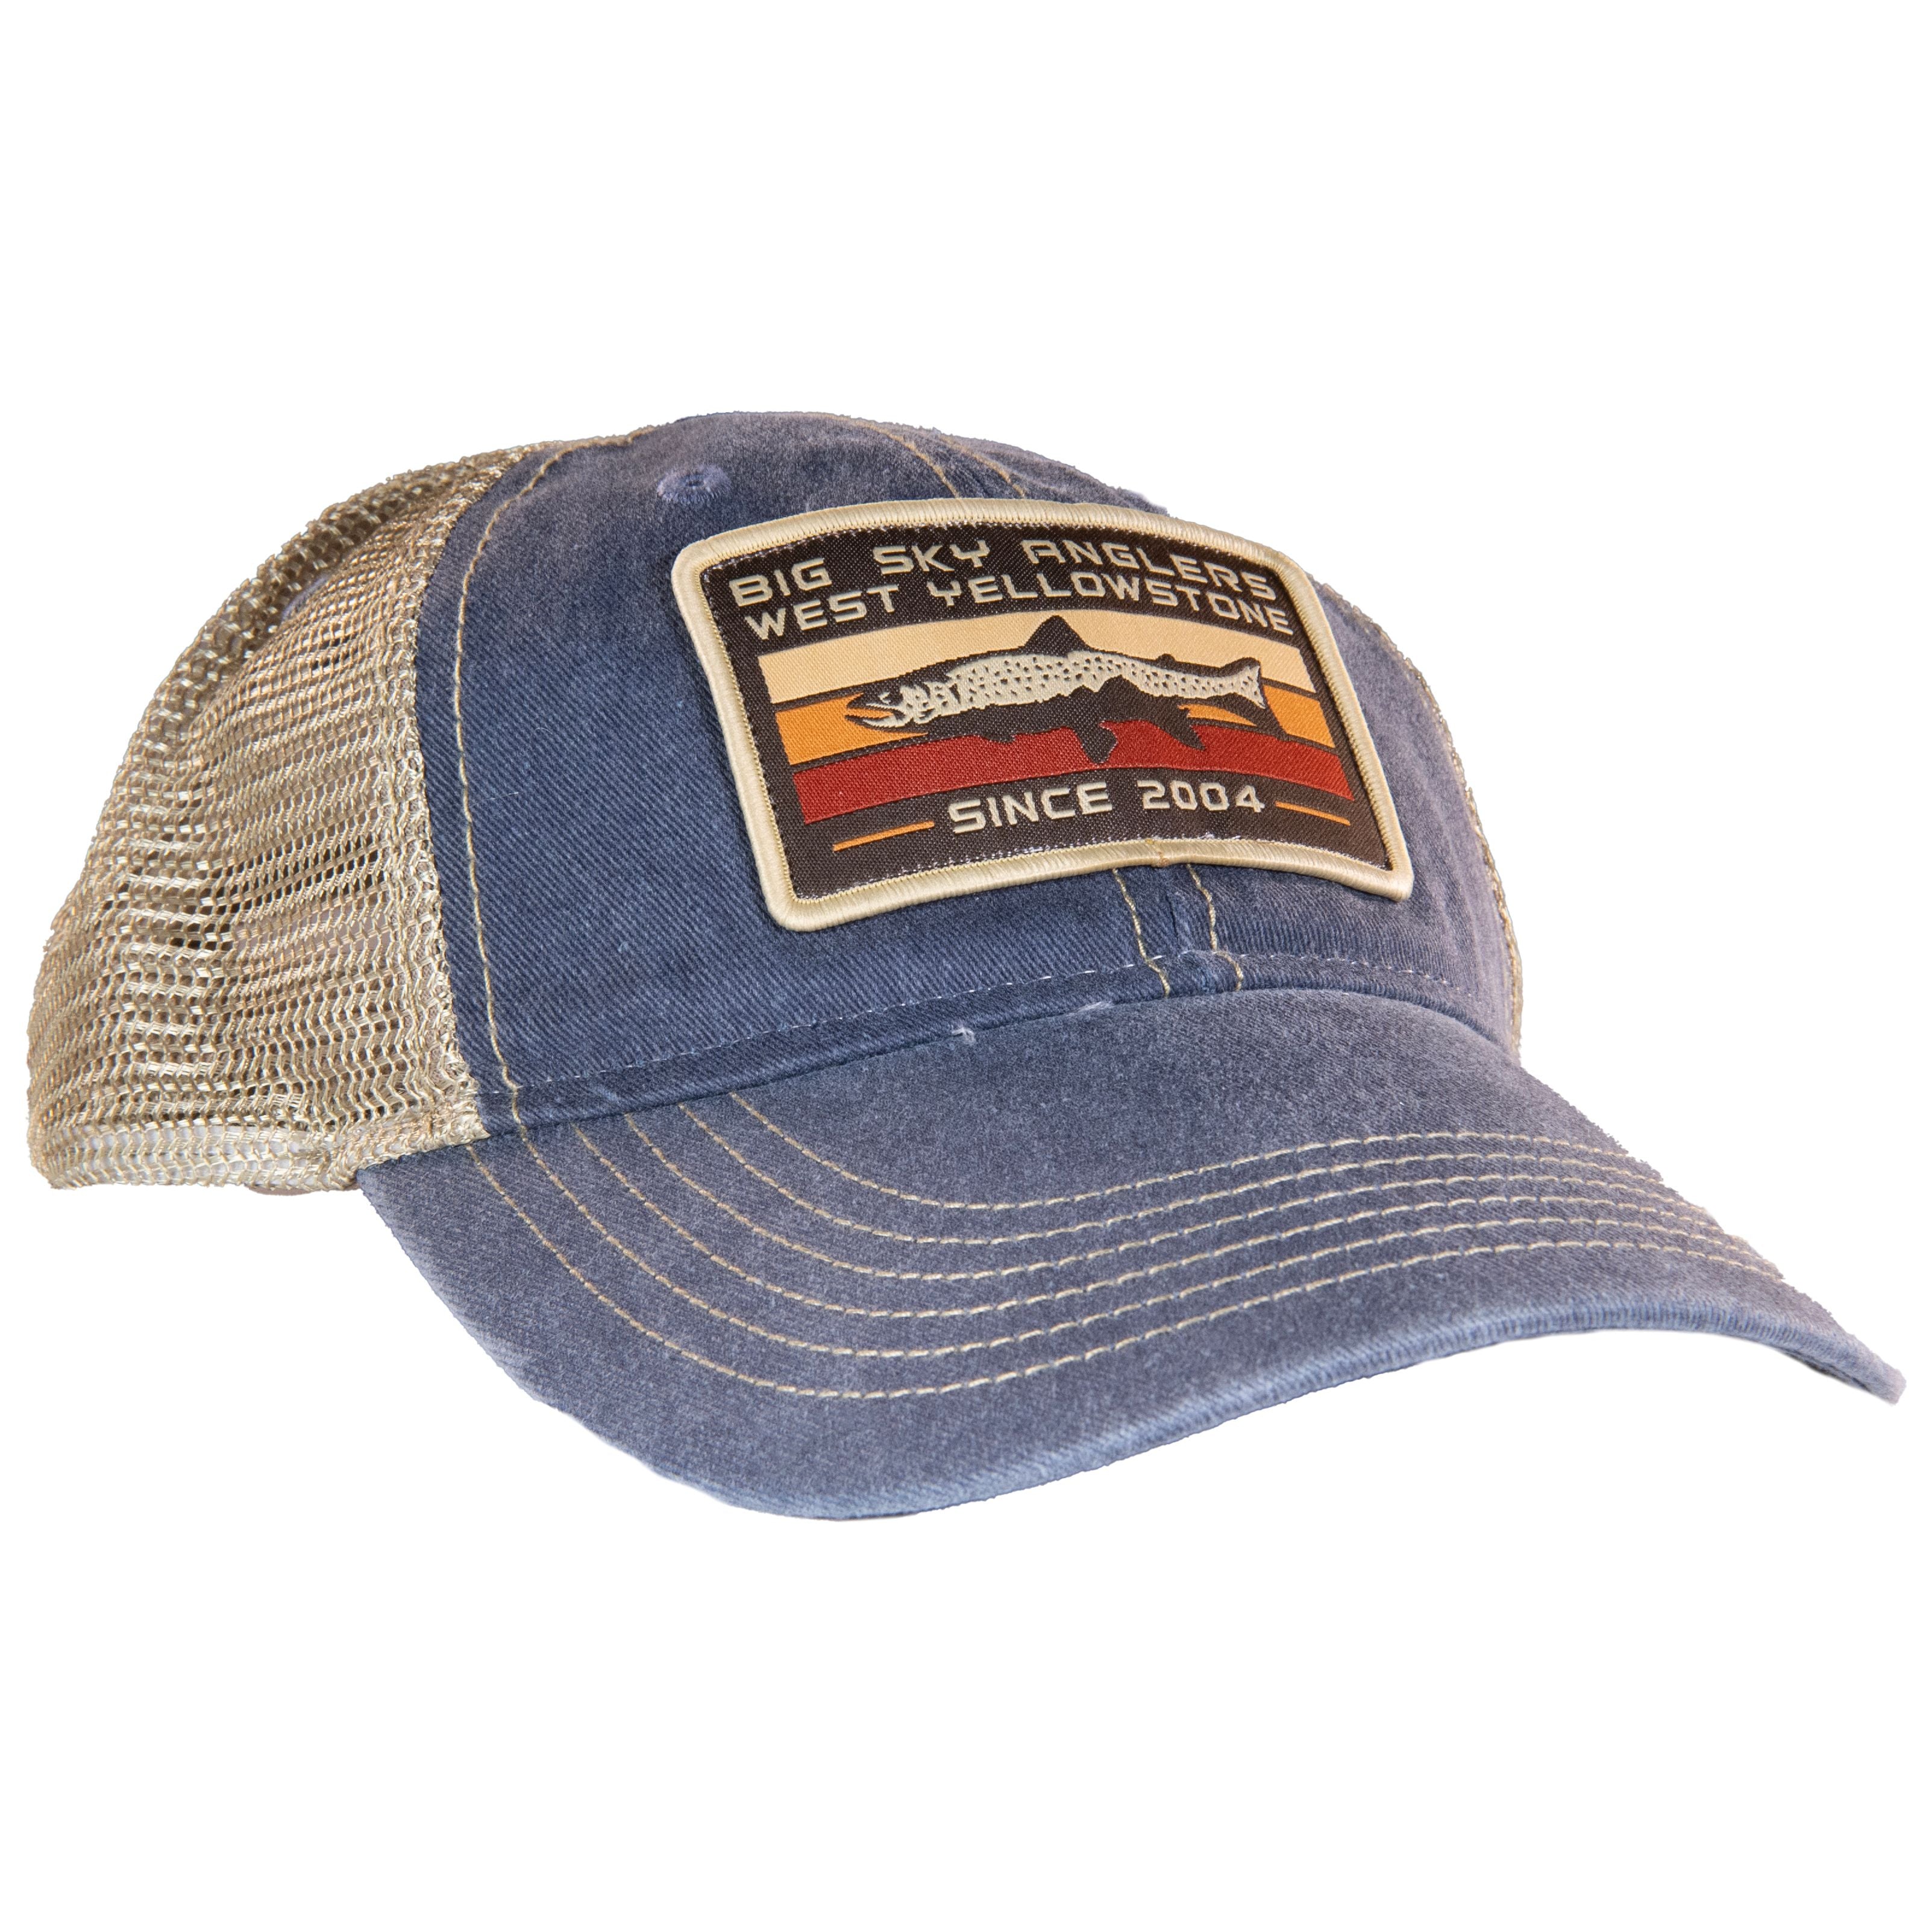 Big Sky Anglers Retro Mountain Trout Patch Vintage Washed Trucker - Navy/Khaki Default Title Image 01